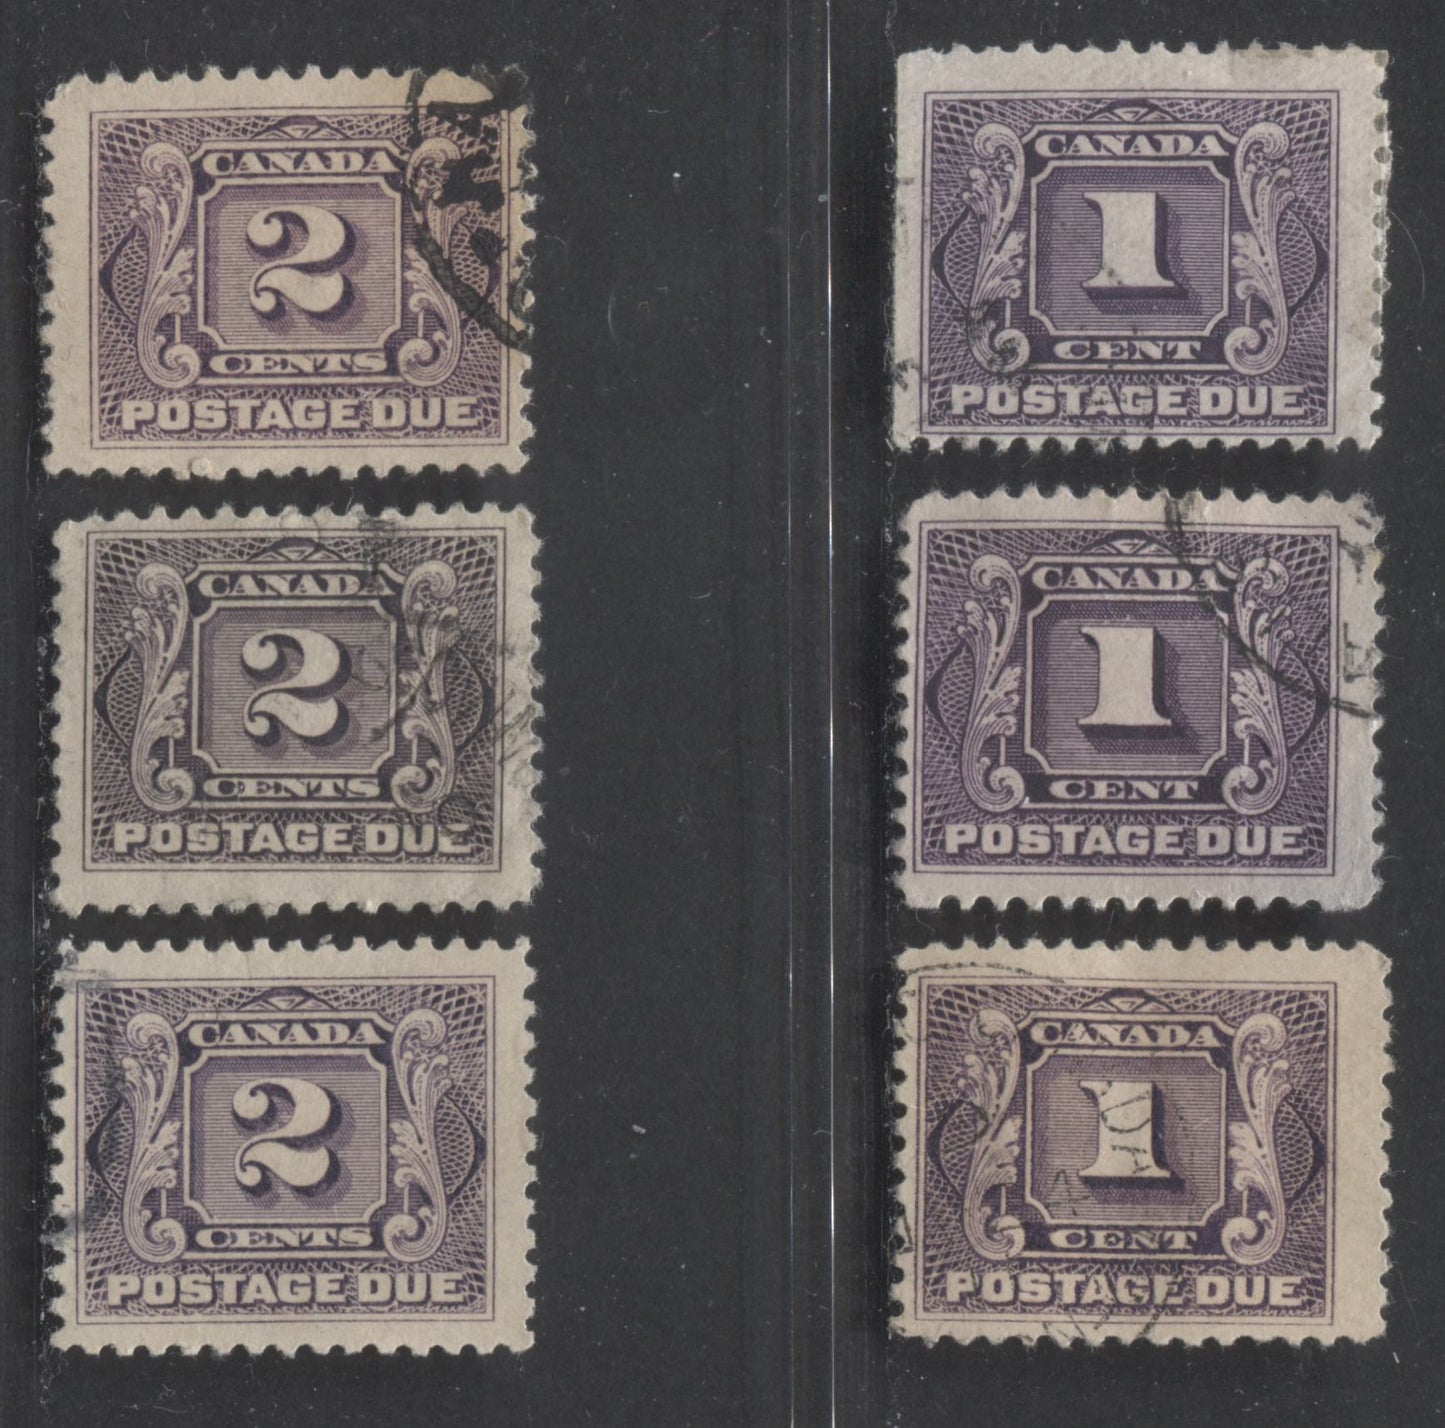 Lot 6 Canada #J1, J1a, J2 1c & 2c Violet, 1906-1928 First Postage Due Issue, 6 Fine Used Singles, CDS Postal Cancels, Wet Printings